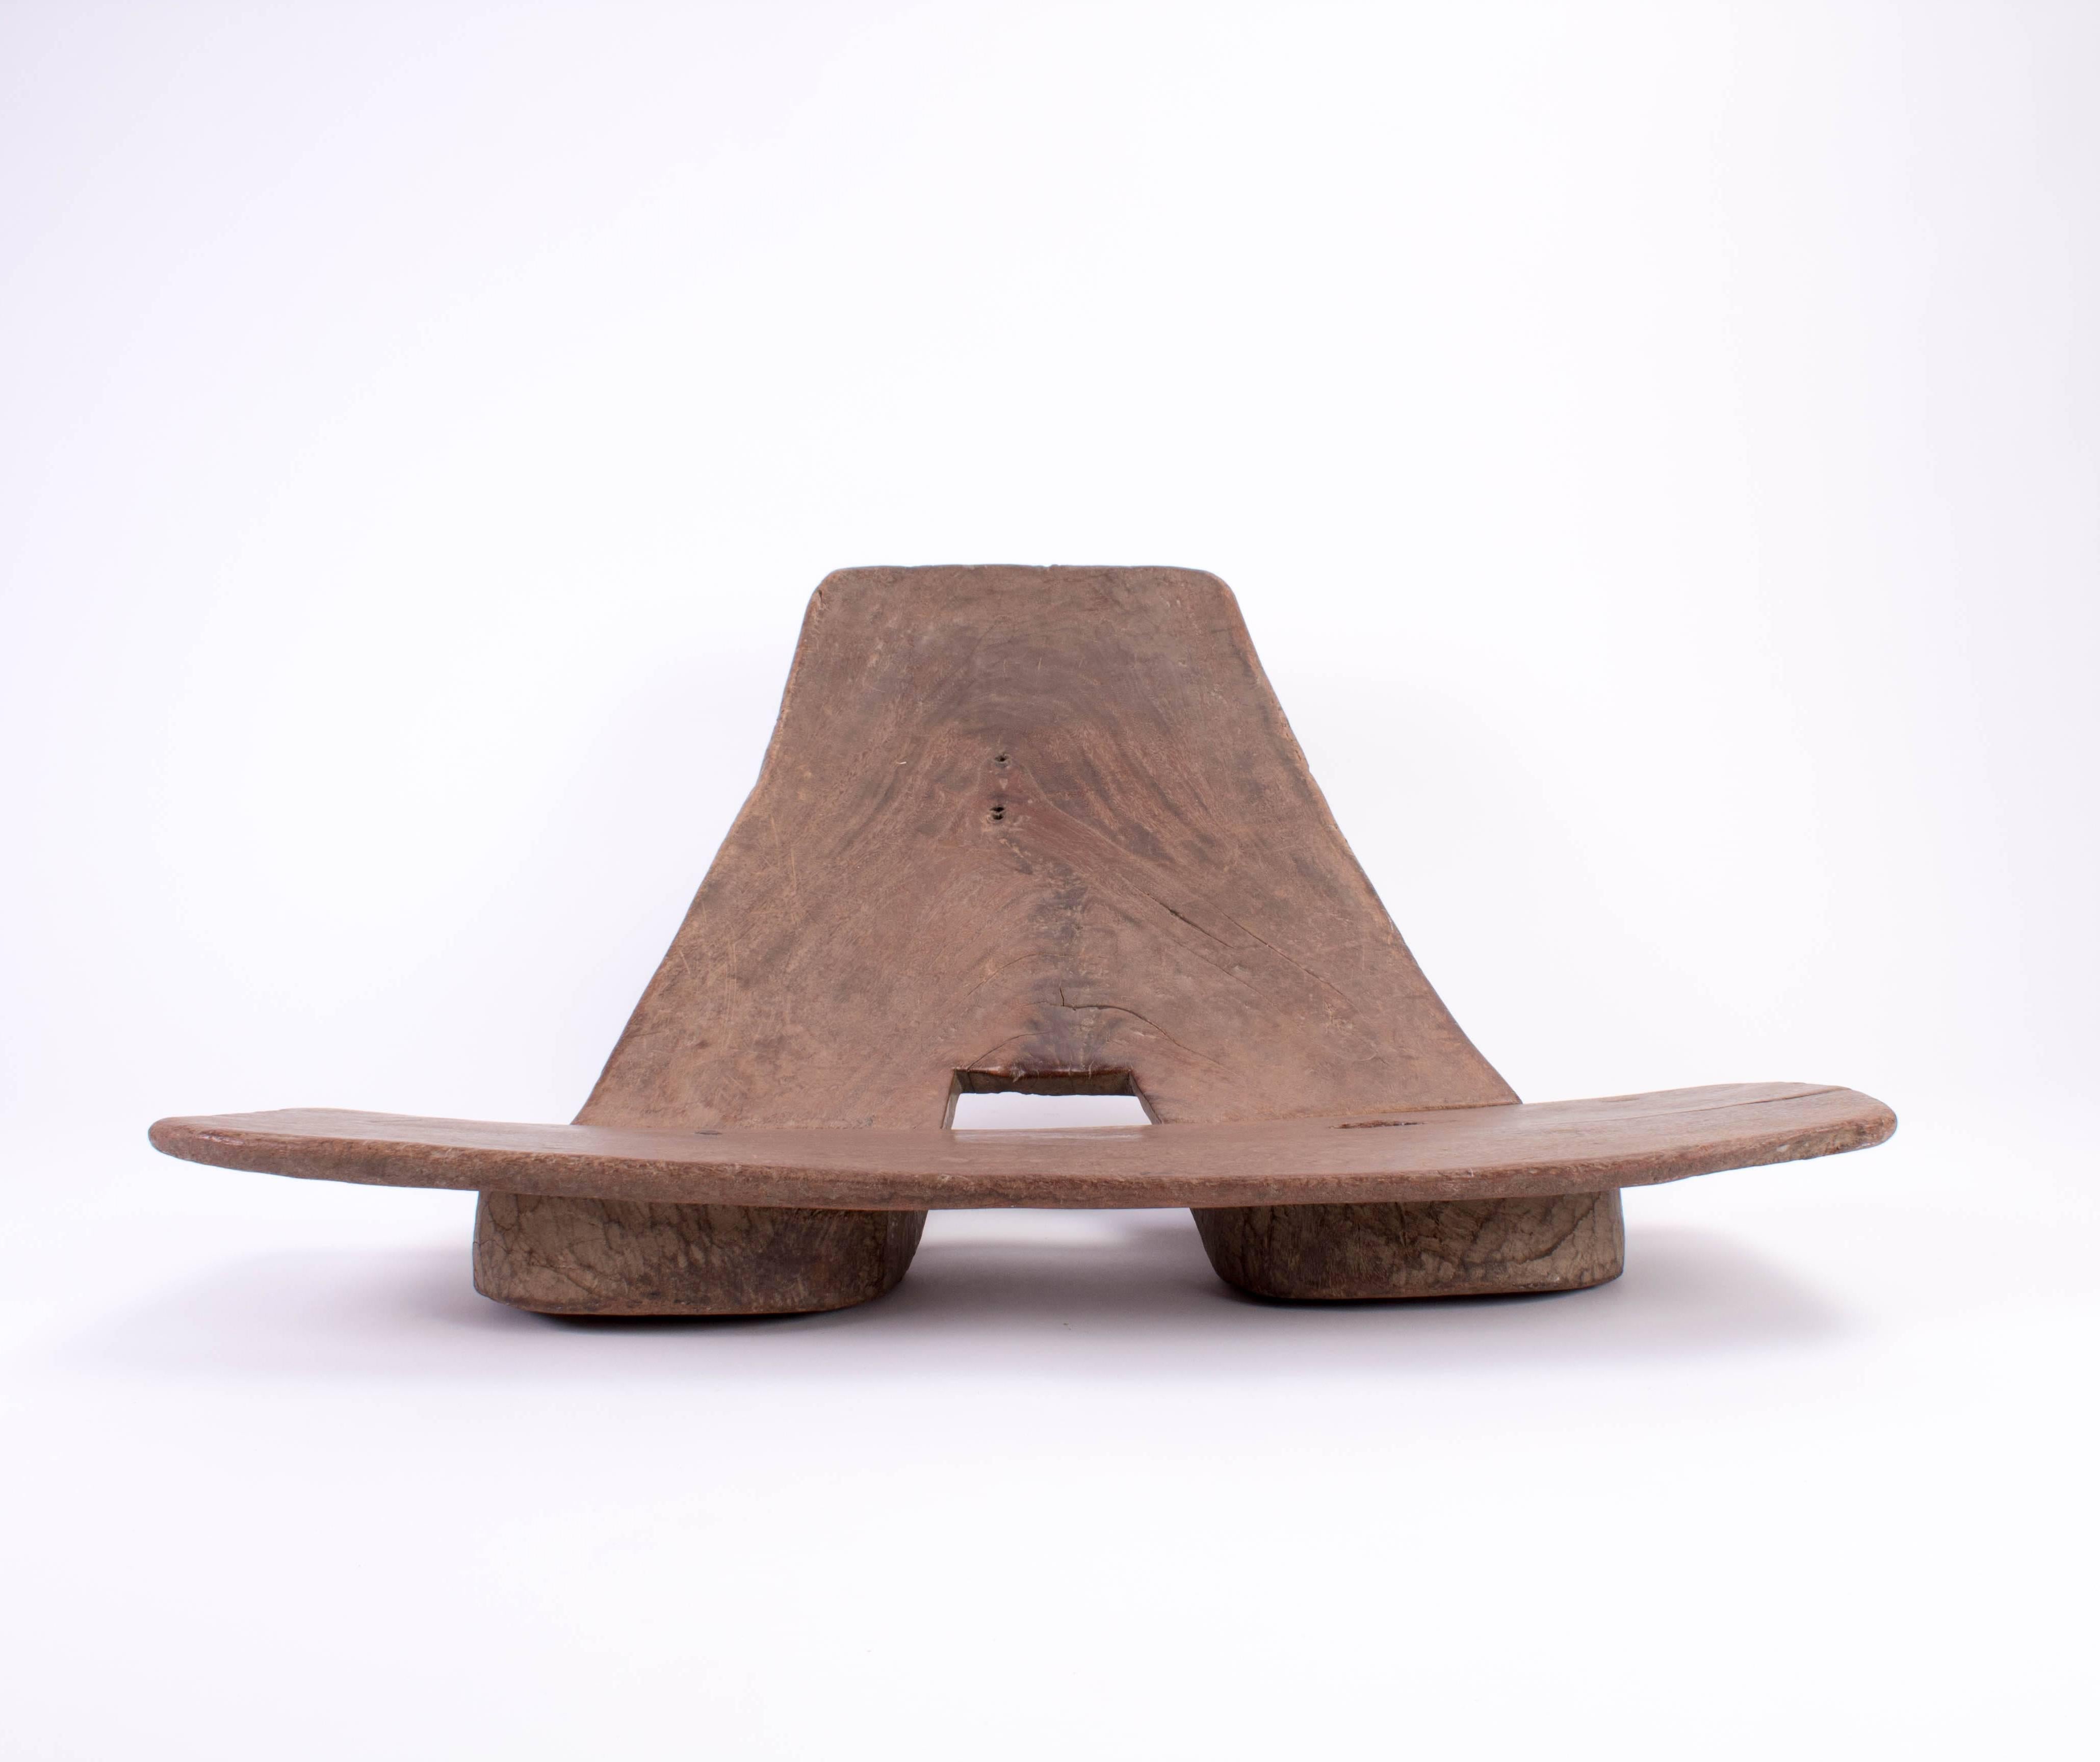 African birth chair, most likely from Mali. Also known as a stargazing chair.